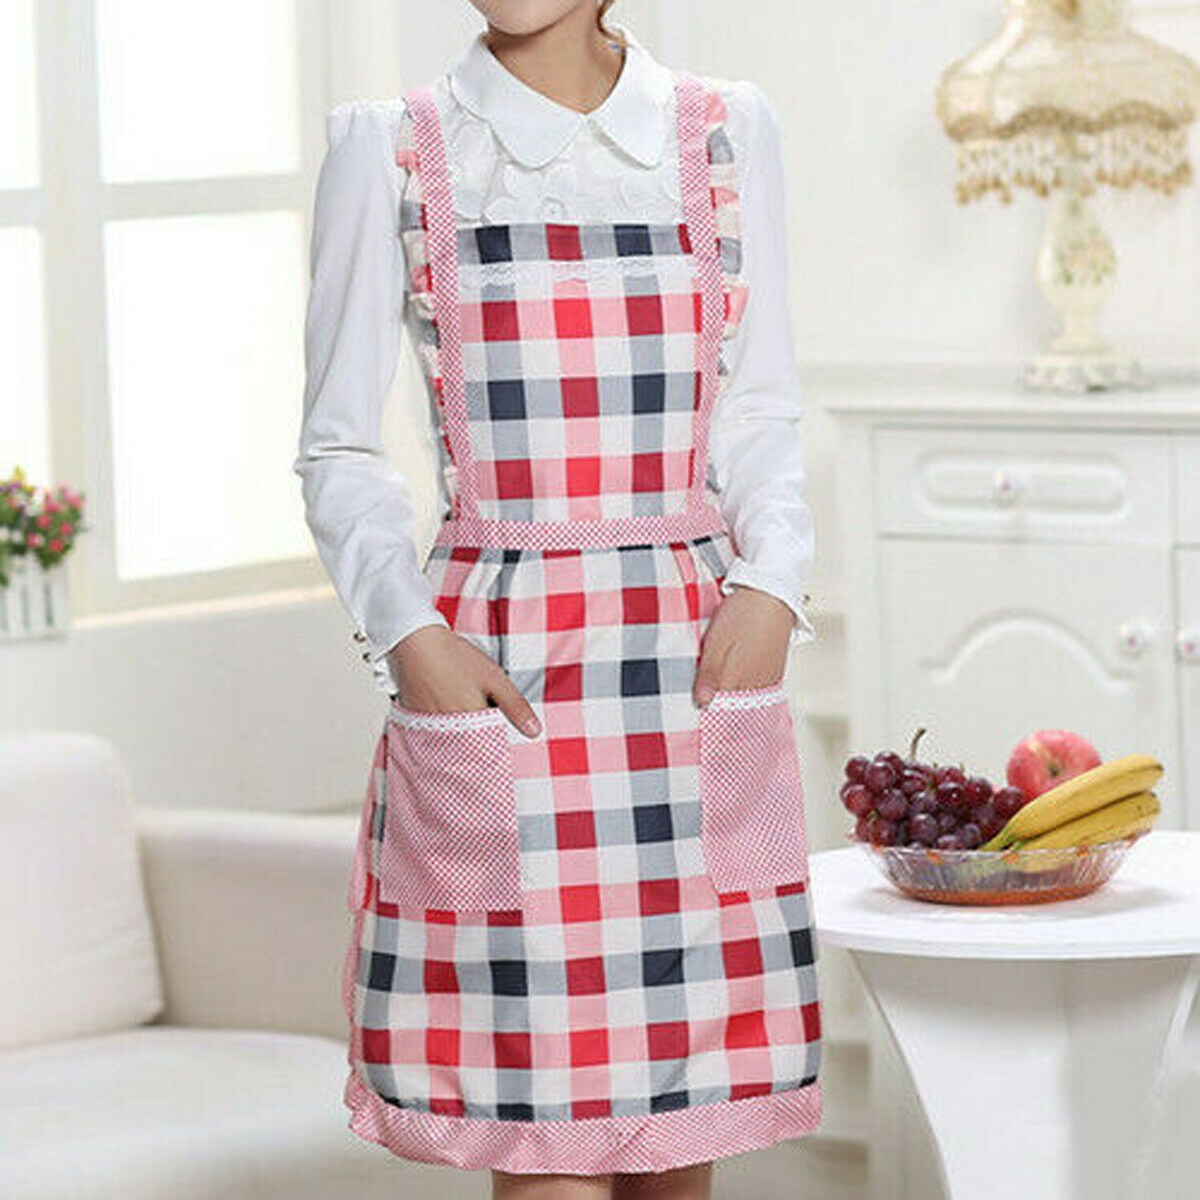 Details about   HN Women Floral Waterproof Home Kitchen Restaurant Cooking Chef Apron with Pock 